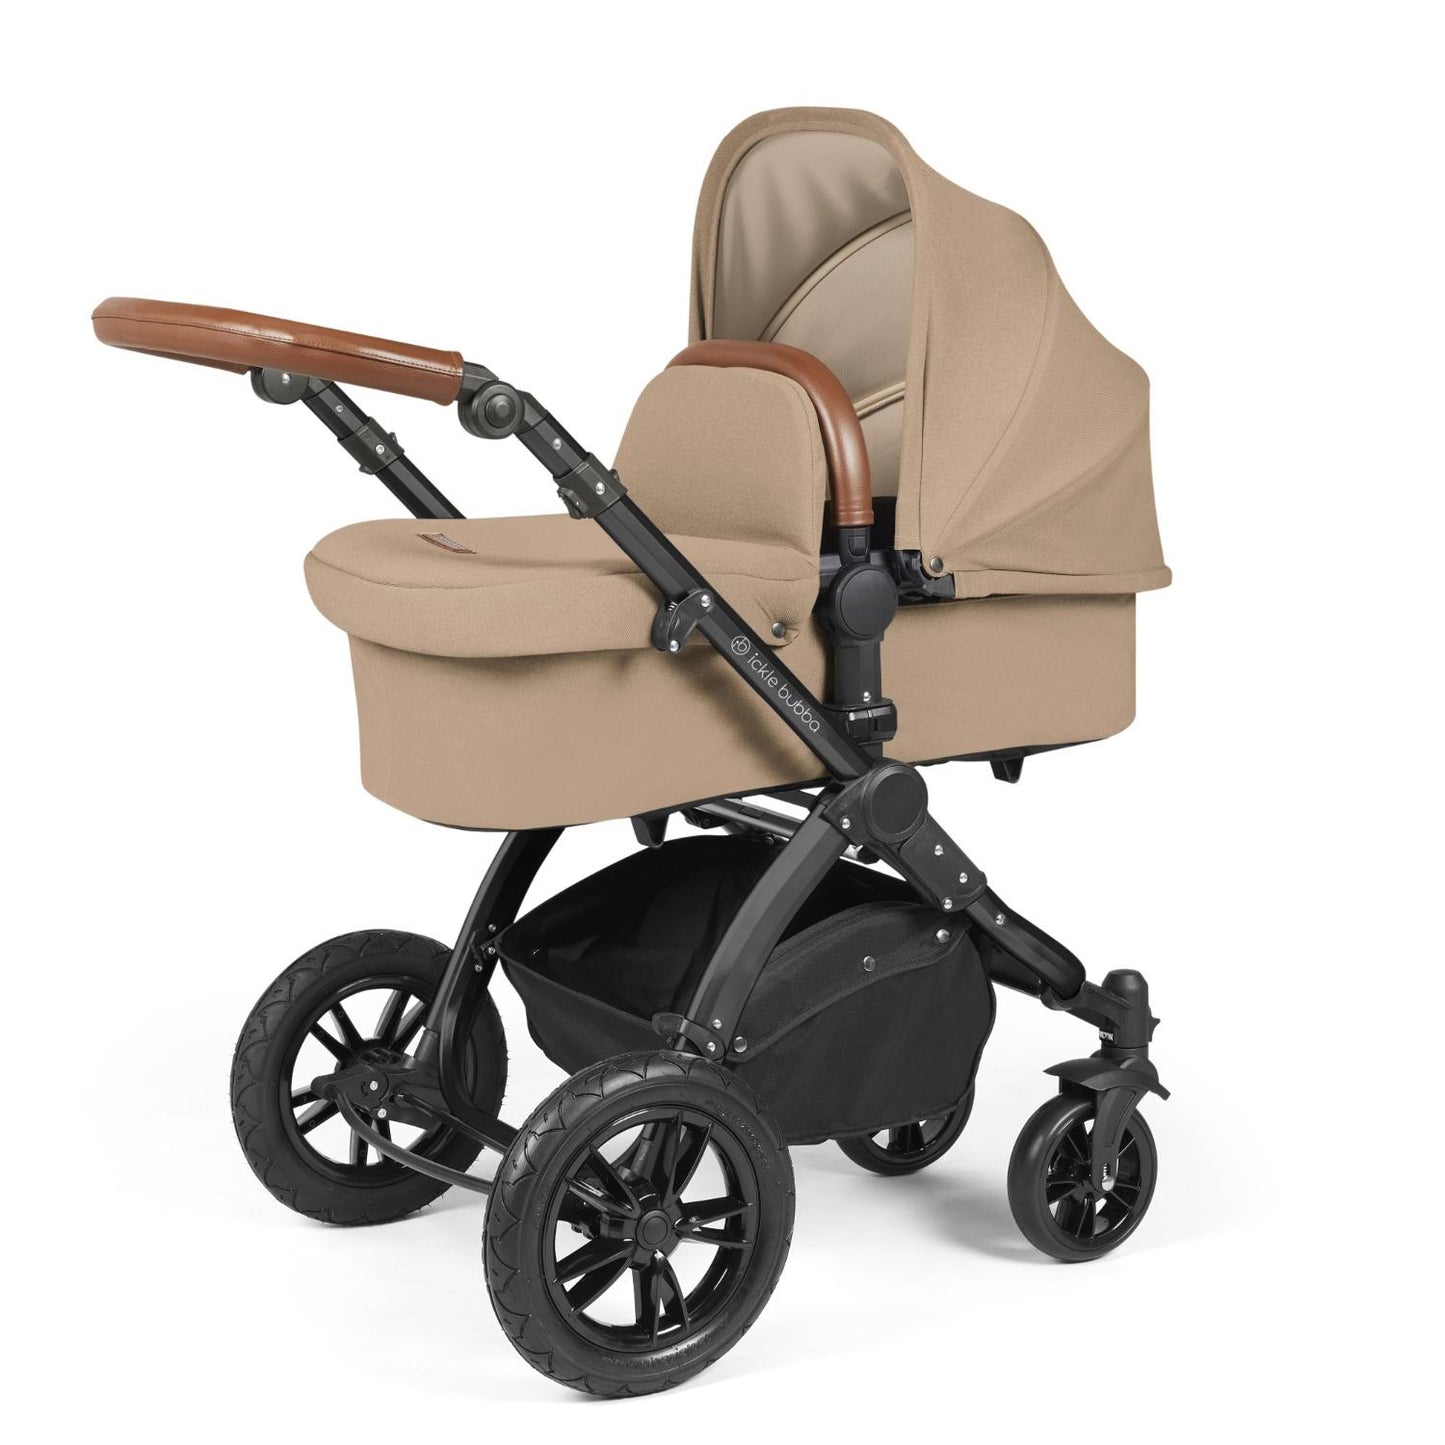 Ickle Bubba Stomp Luxe Pushchair with carrycot attached in Desert beige colour with tan handle